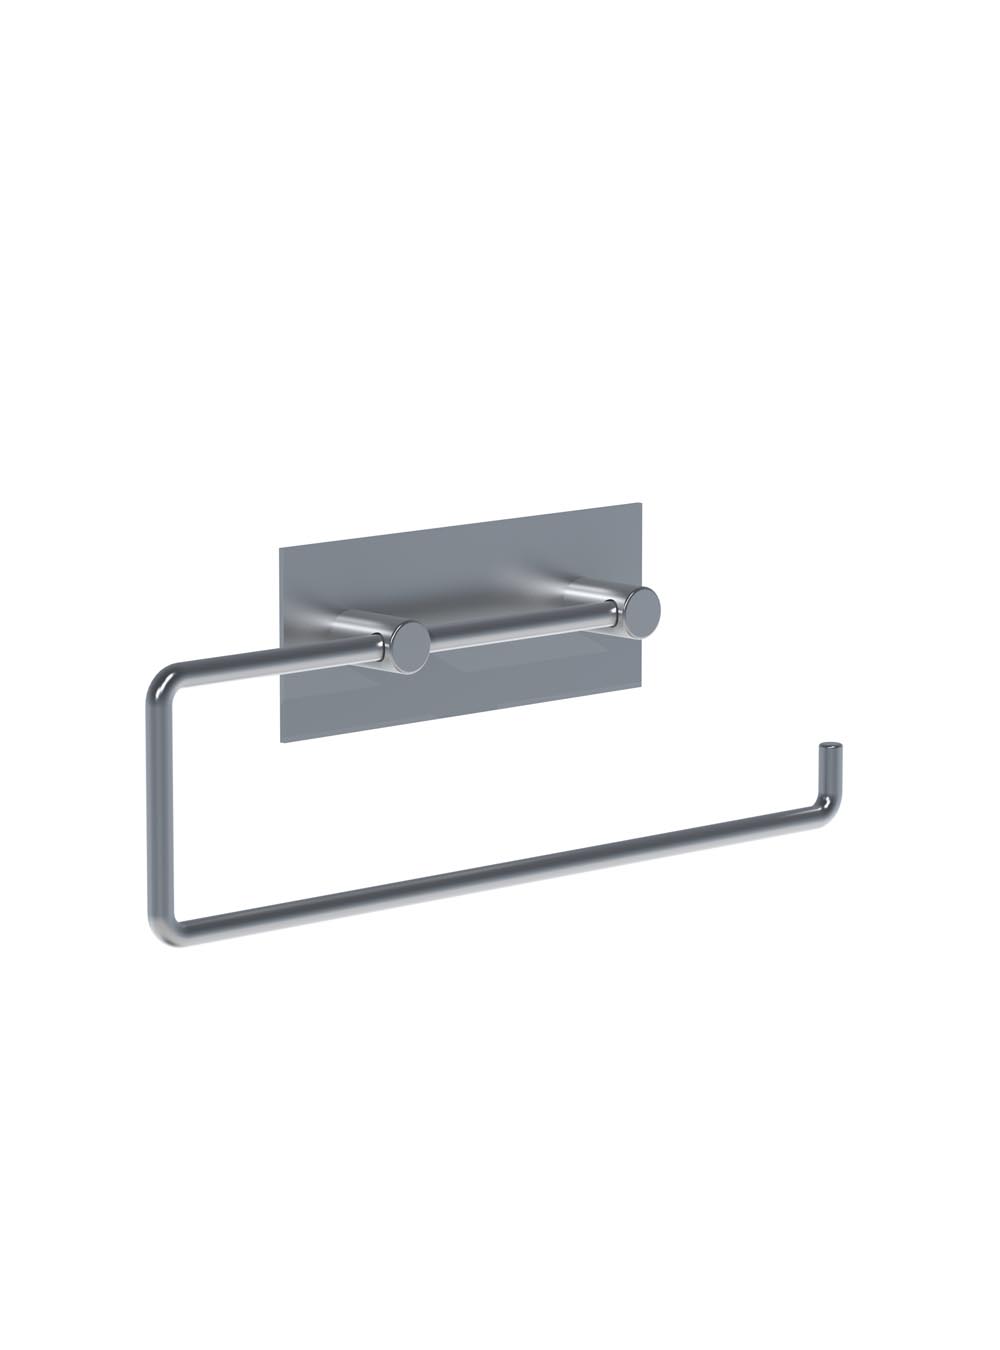 T13L: Double toilet roll holder or kitchen roll holder with extended bar.